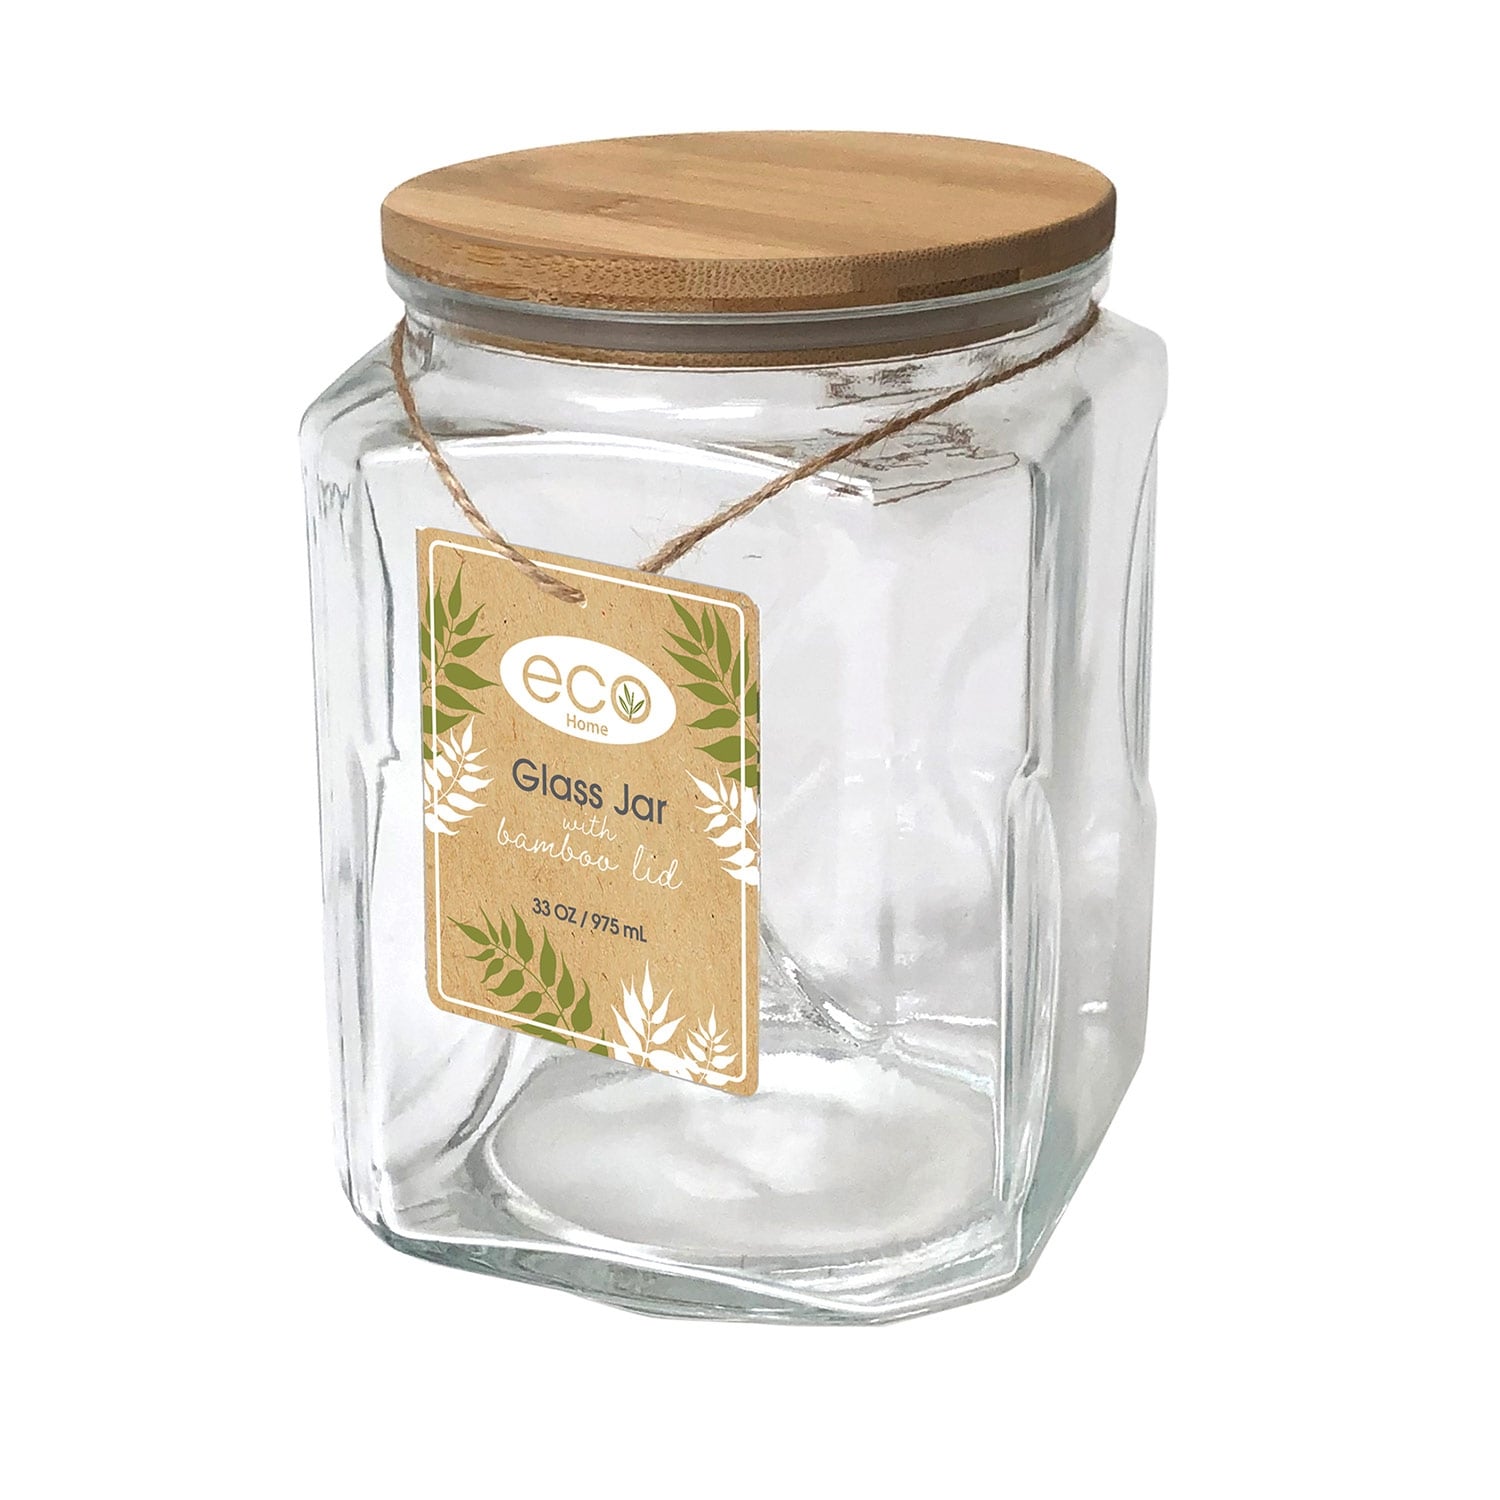 https://ak1.ostkcdn.com/images/products/is/images/direct/3f8930f9e1fb21201c262b638e75a84cdf5642c4/Premius-Eco-Glass-Jar-With-Bamboo-Lid%2C-Clear%2C-1-Quart.jpg